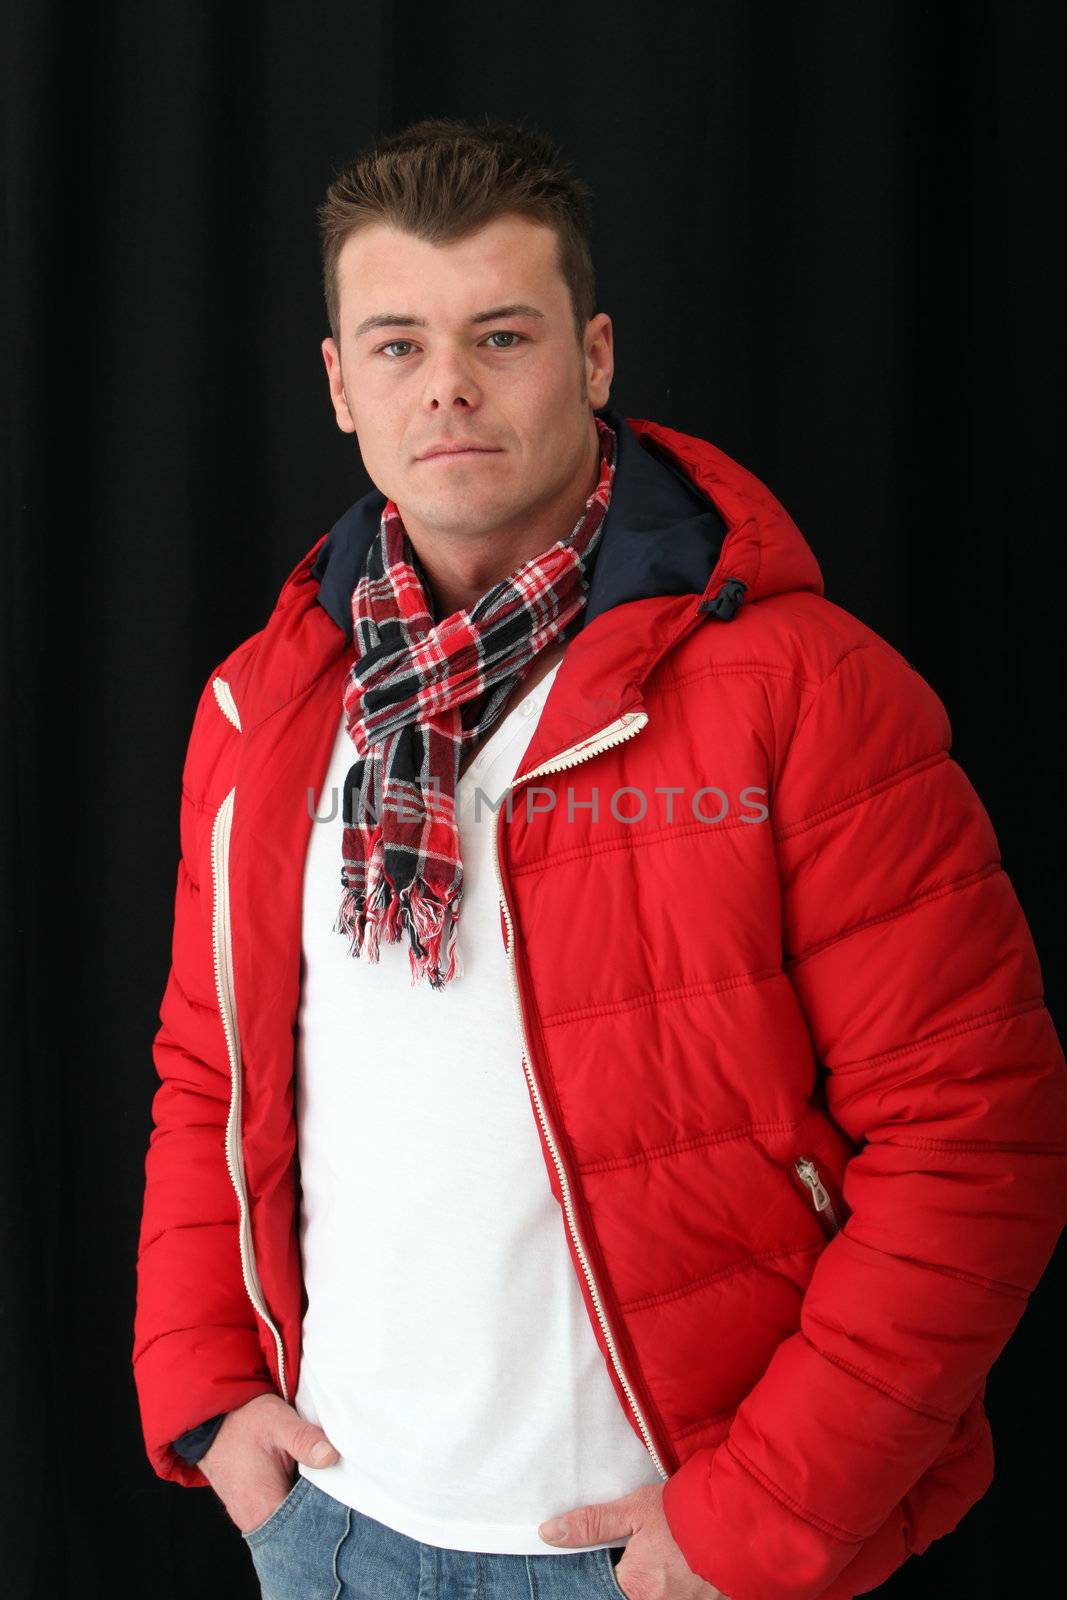 Muscular man wearing red jacket posing against the black background